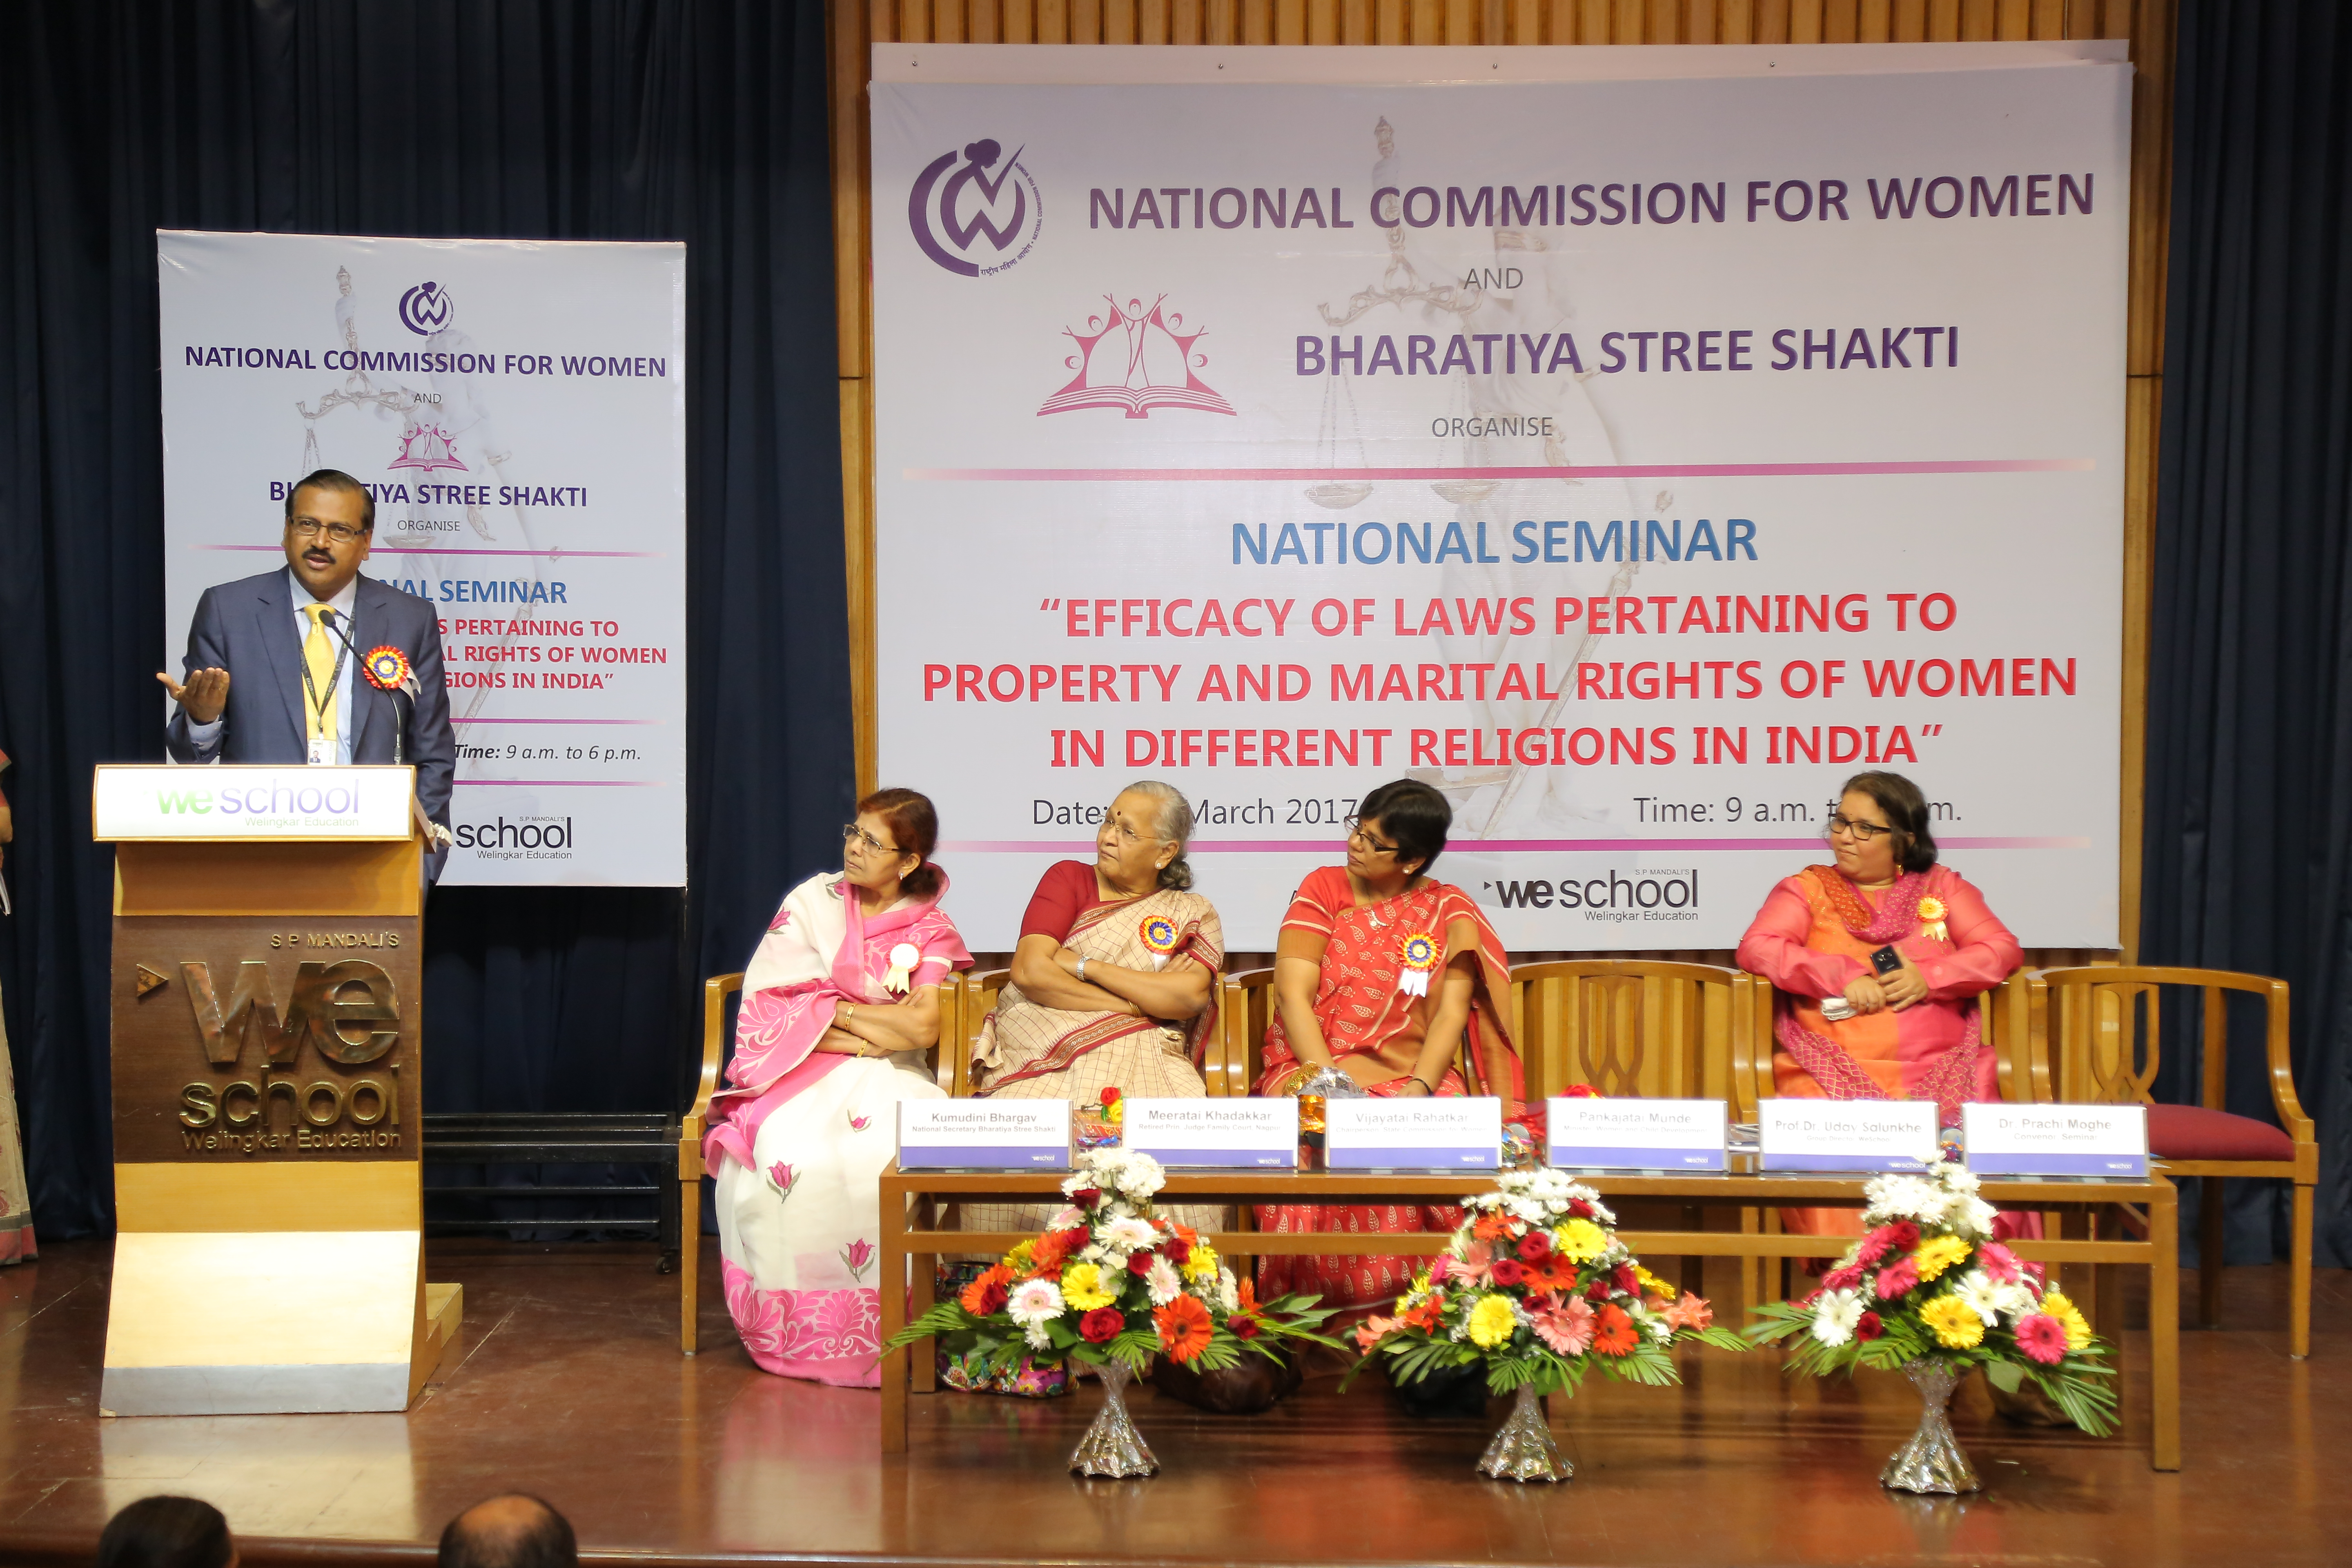 Seminar on ‘Efficacy of Laws pertaining to Property and Marital Rights in Different Religions in India’